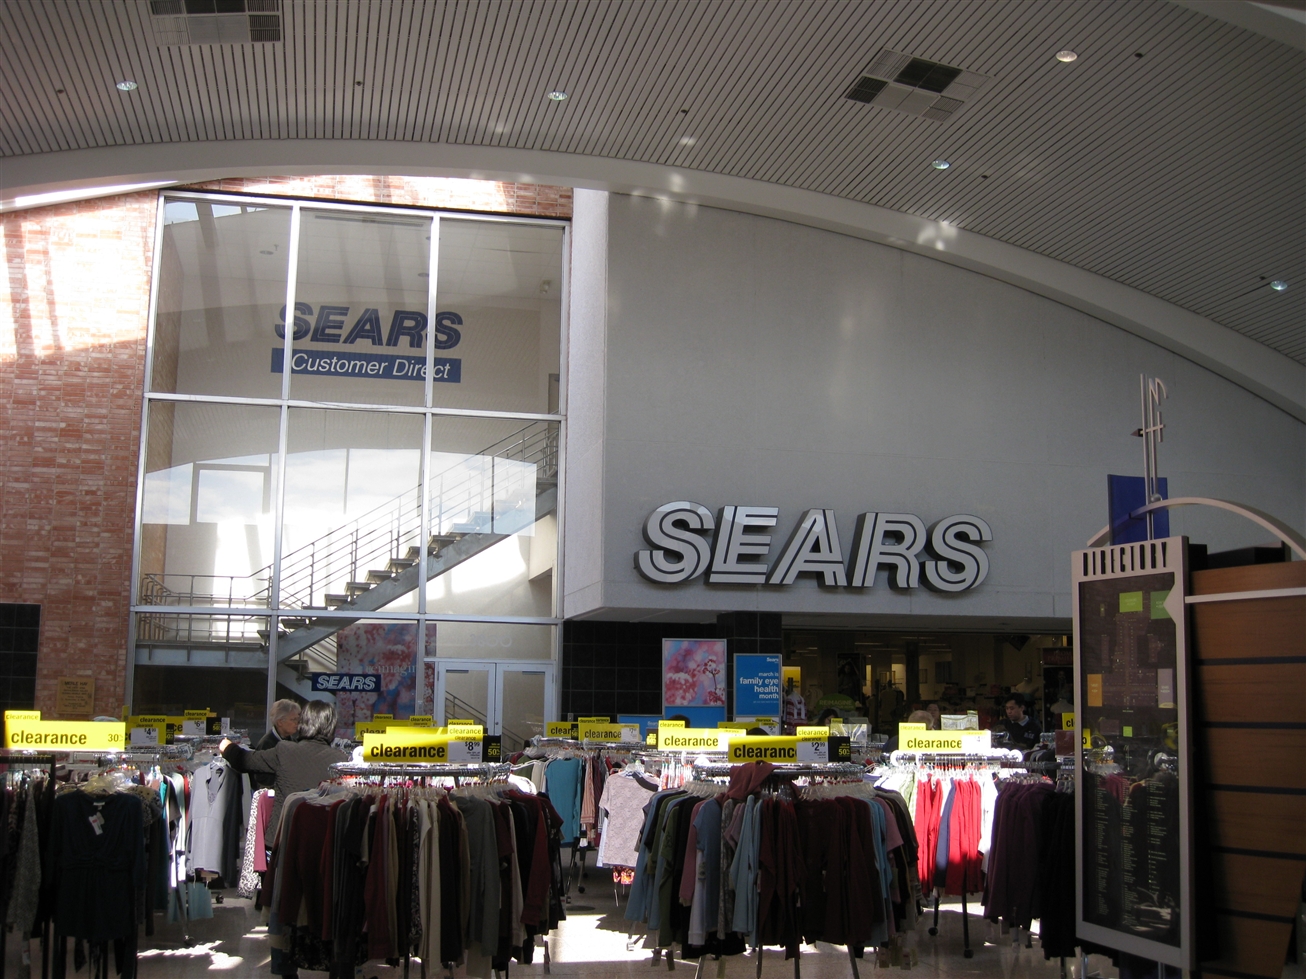 Merle Hay Mall Sears in Des Moines, IA